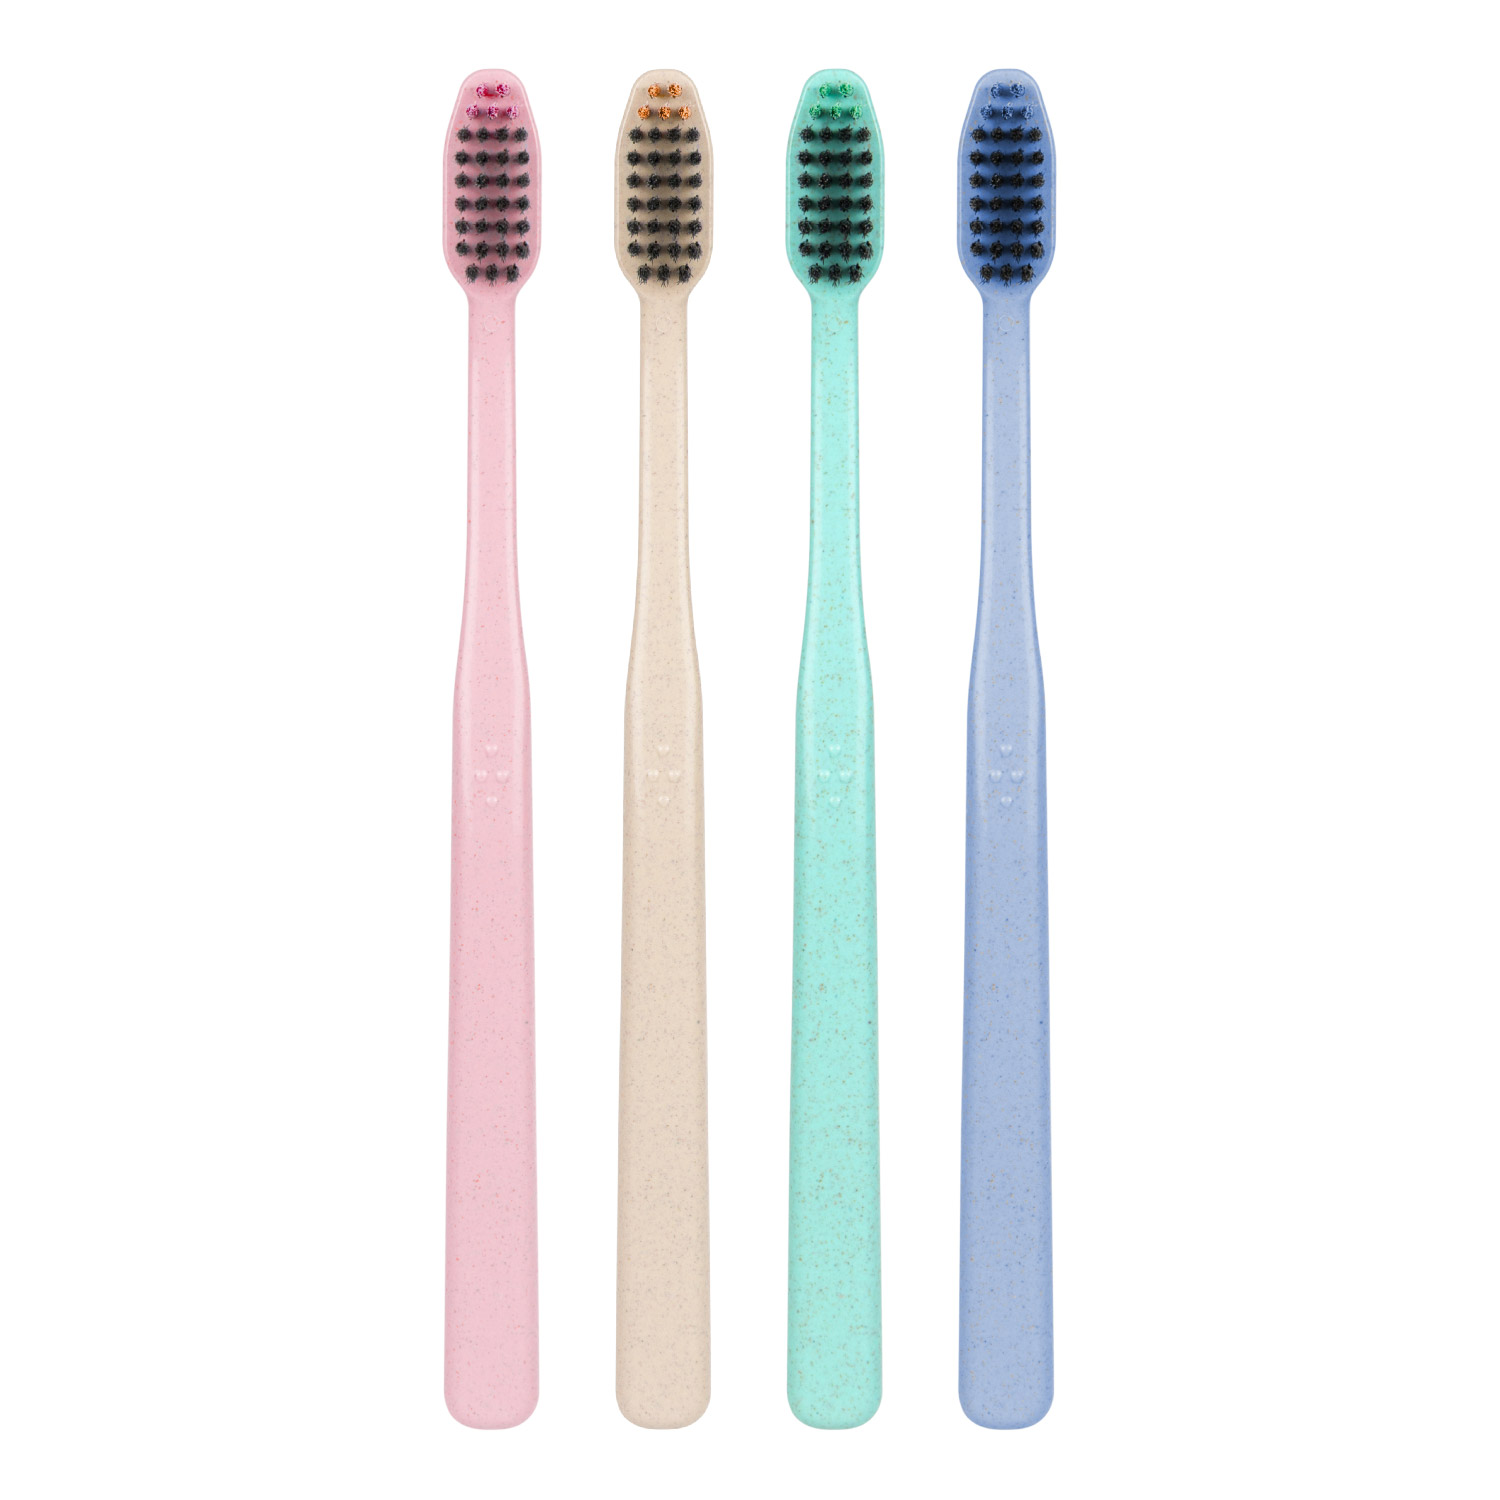 https://www.lindoproducts.com/wp-content/uploads/2021/01/Biodegradable-Toothbrush-Amazon-Images-15.jpg